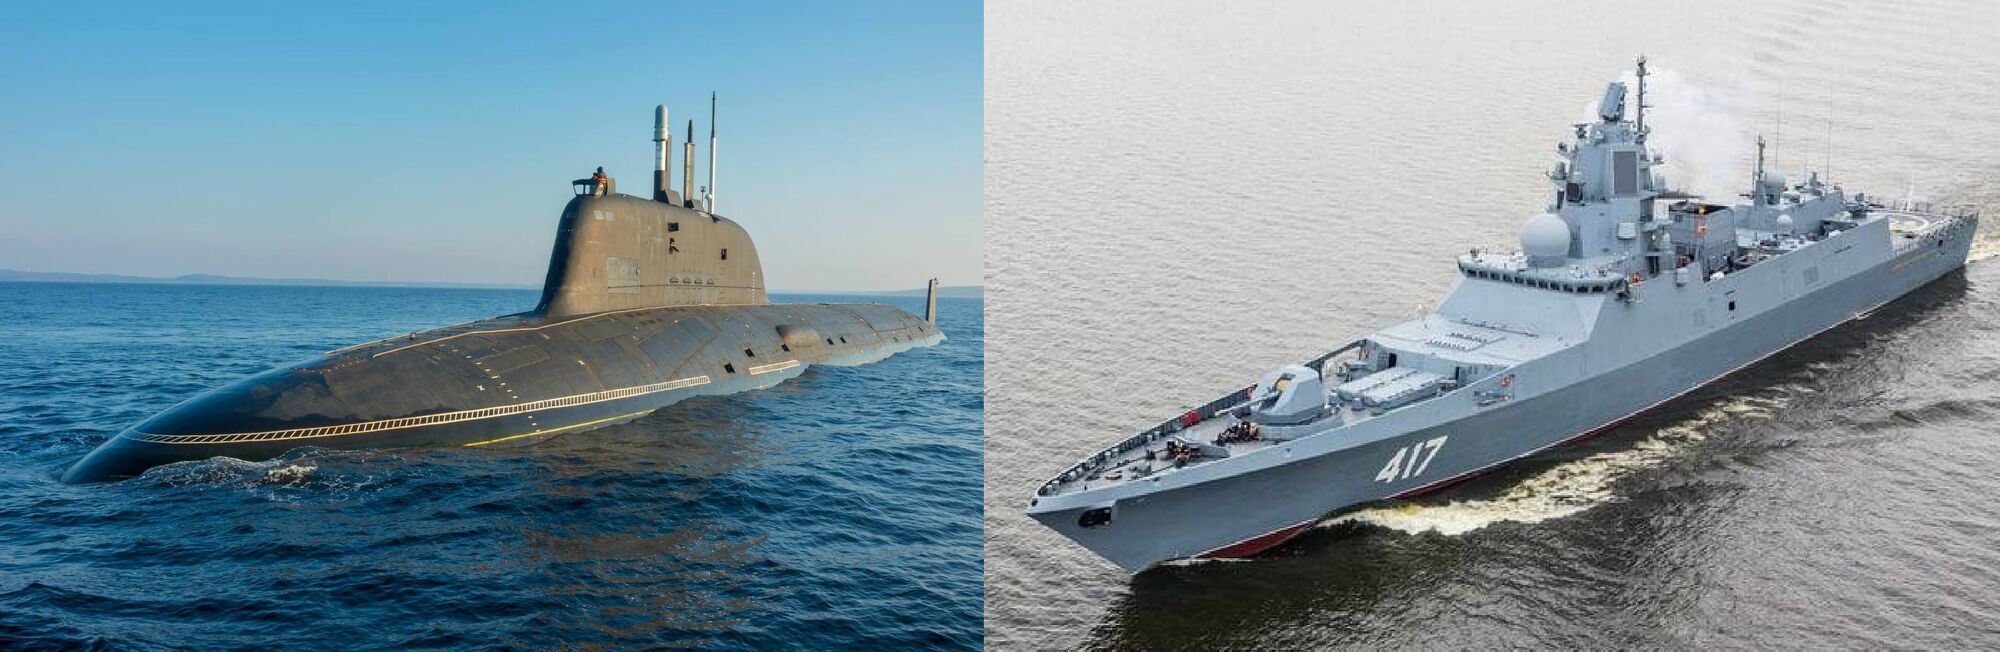 Russia sent a group of warships and a nuclear submarine to Cuba: what's going on